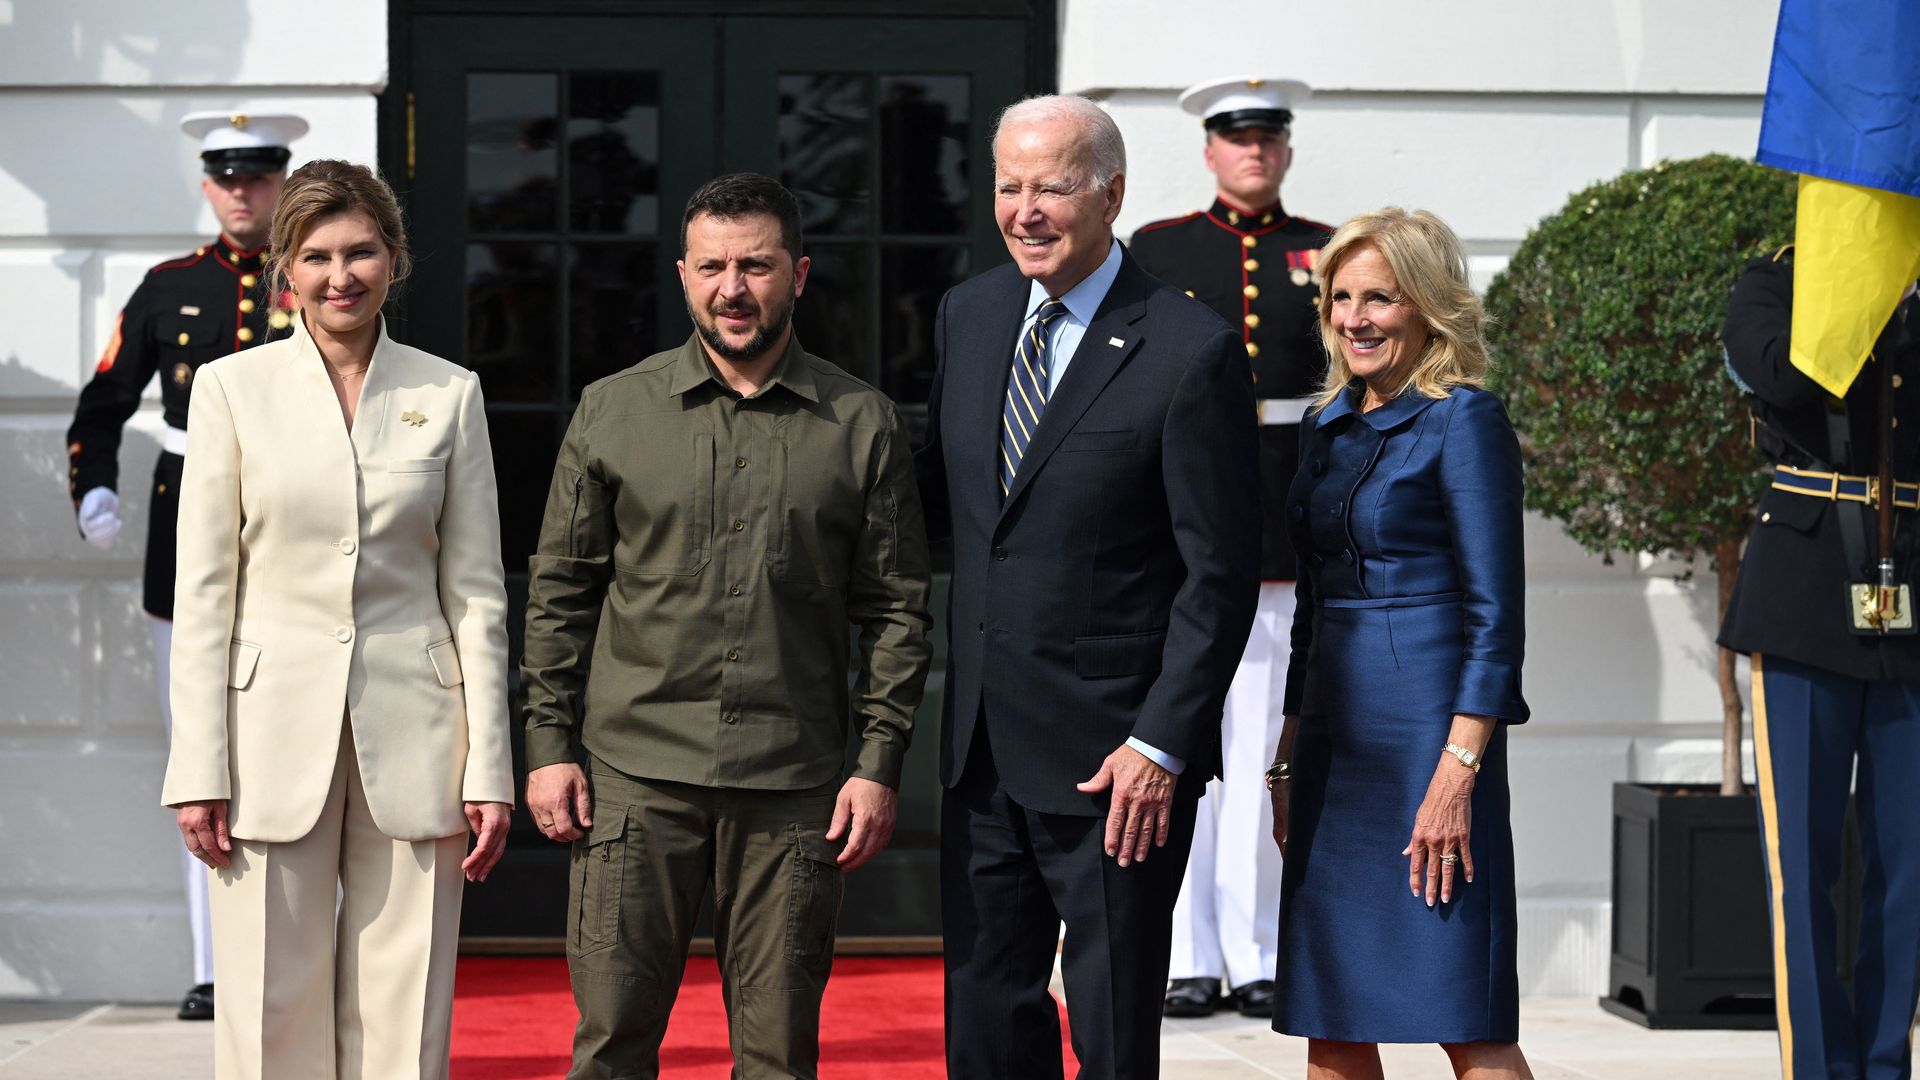 Presidents Biden and Zelensky with first ladies Jill Biden and Olena Zelenska at the White House on Sept. 21.